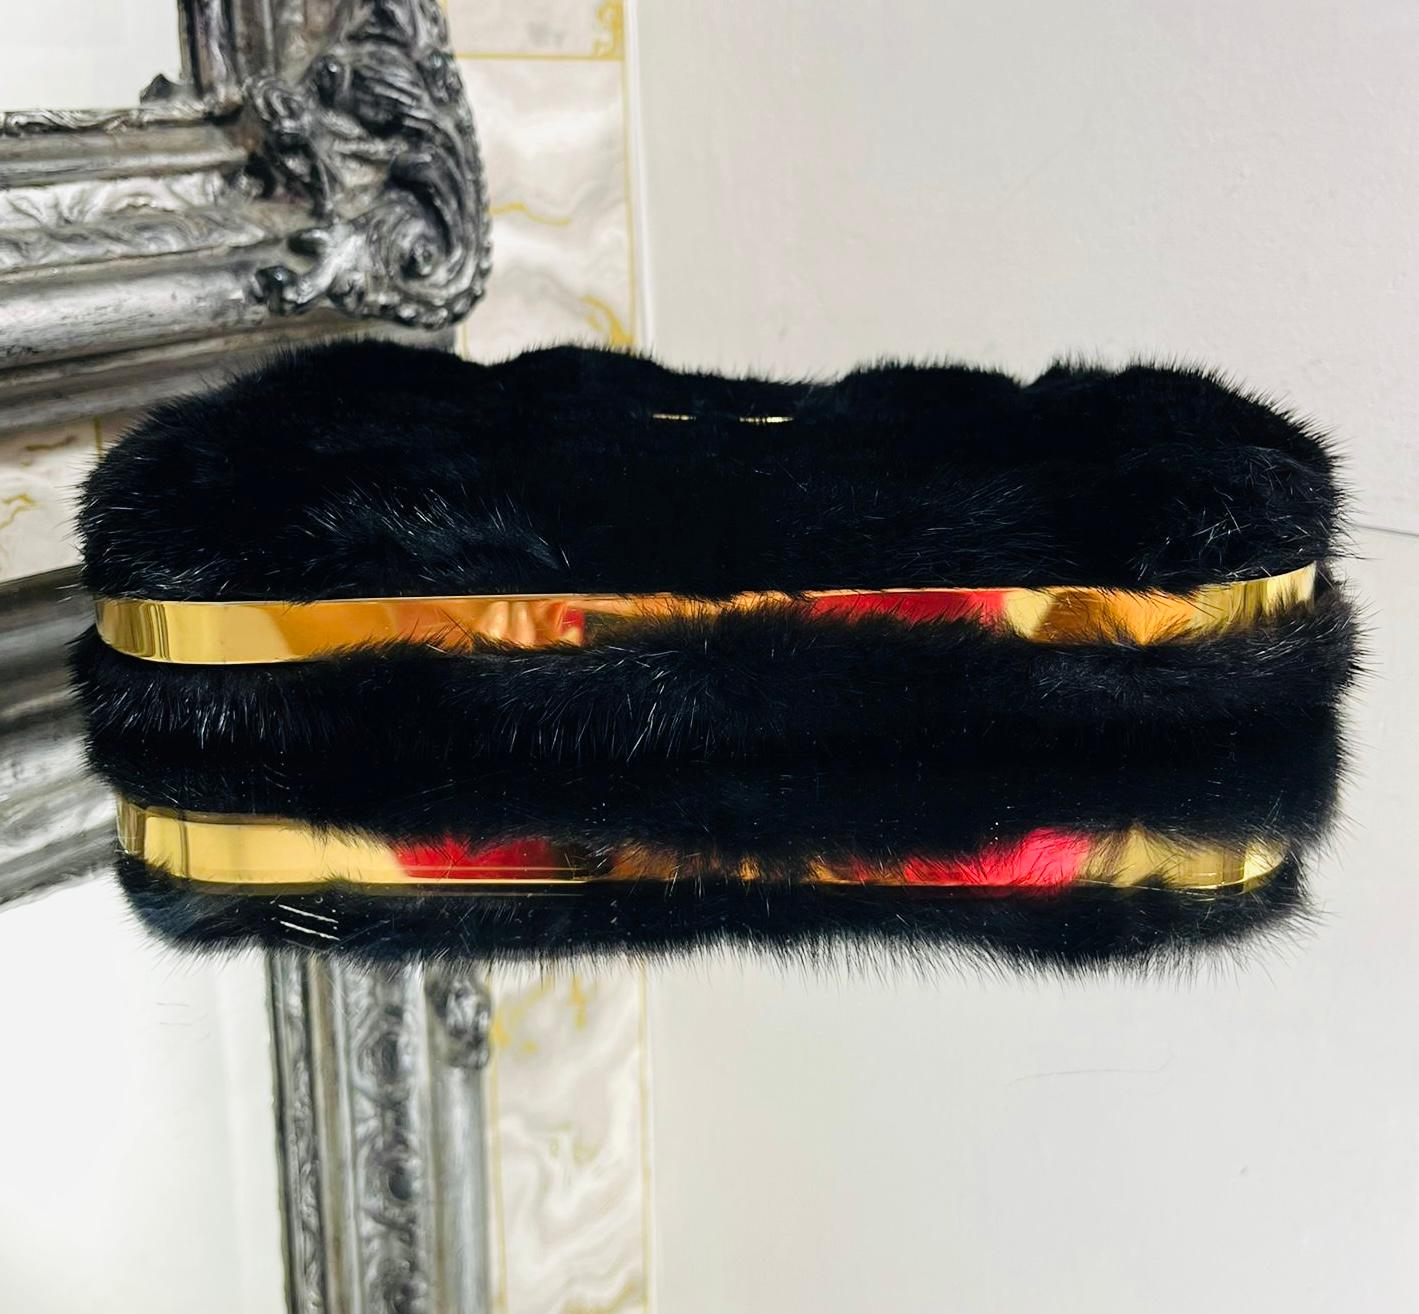 Women's Tyler Ellis Mink Fur Clutch Bag With Leather & Chain Strap For Sale